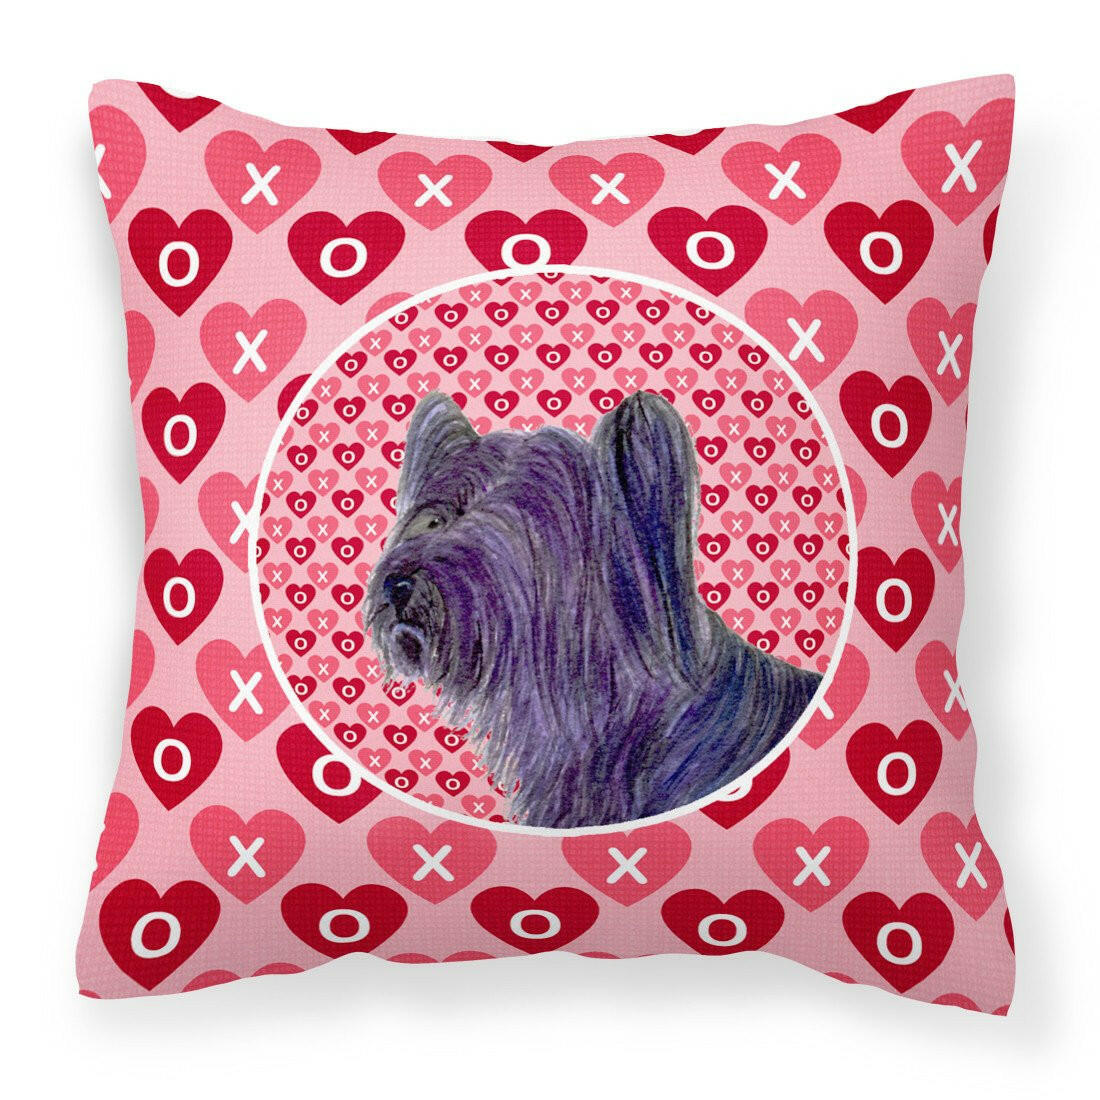 Skye Terrier Hearts Love and Valentine's Day Portrait Fabric Decorative Pillow SS4463PW1414 by Caroline's Treasures